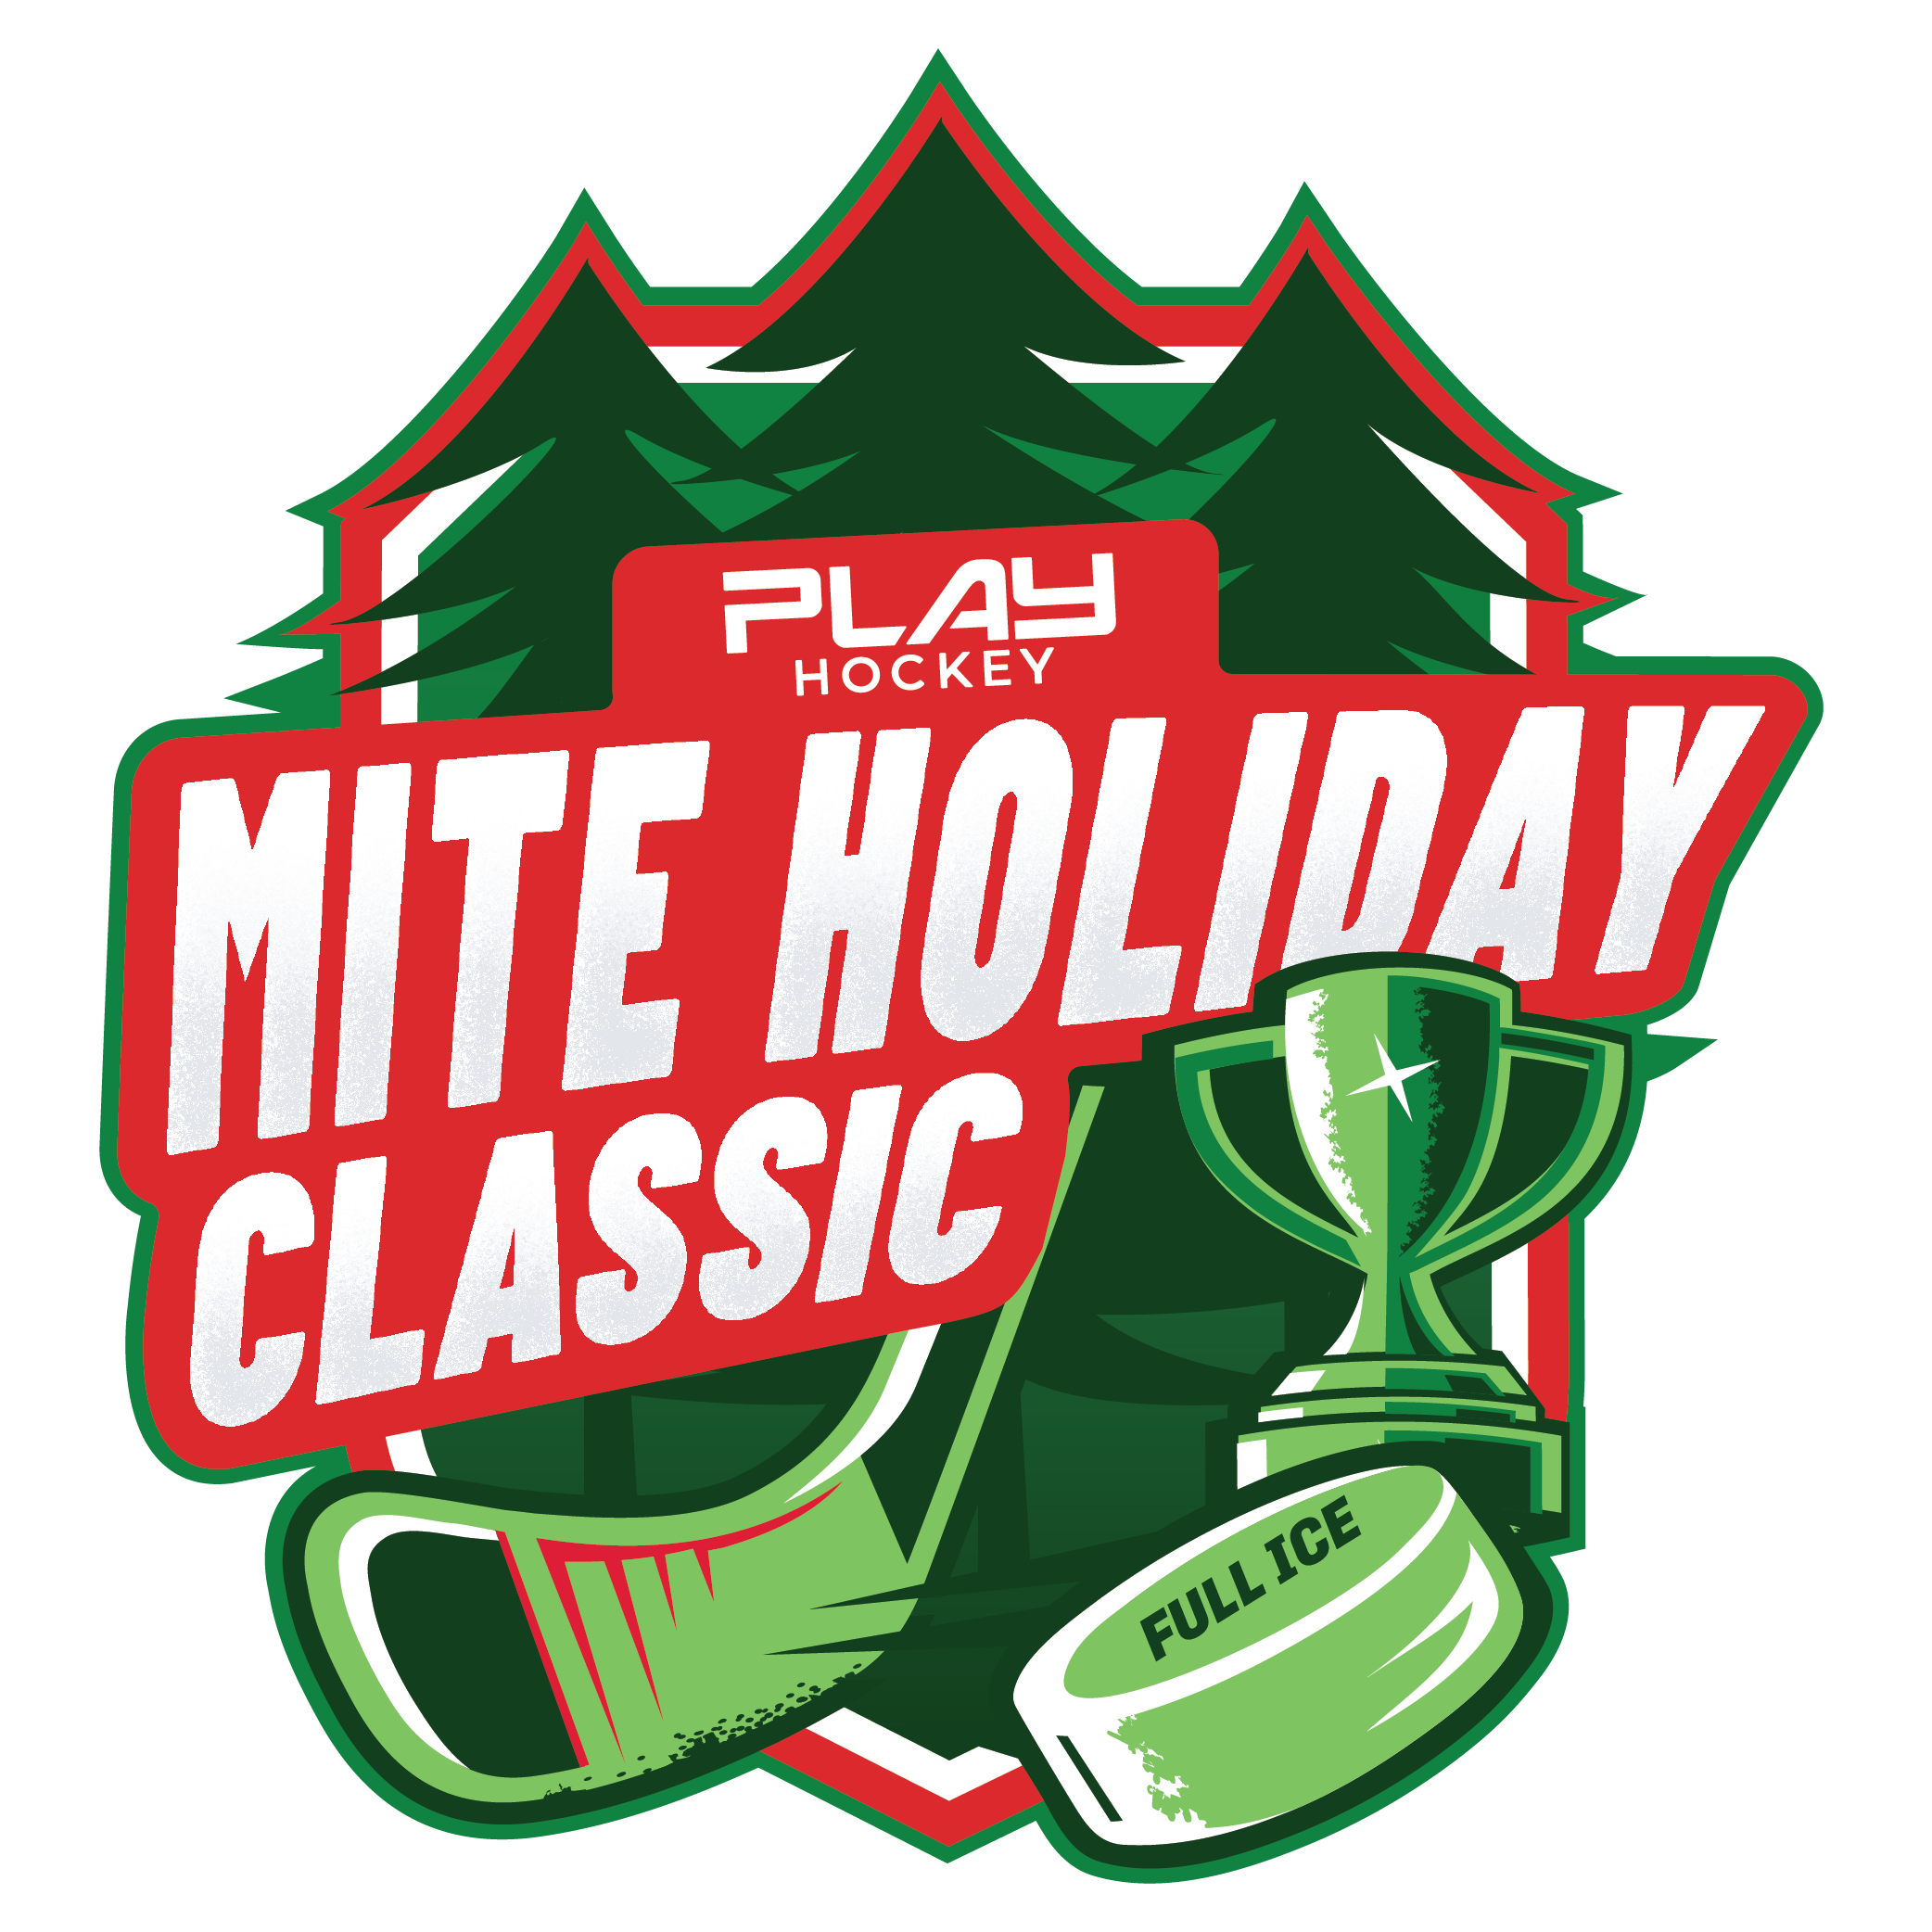 https://20502767.fs1.hubspotusercontent-na1.net/hubfs/20502767/New%20Event%20Logos/PH-Mite-Holiday-Classic-01.png